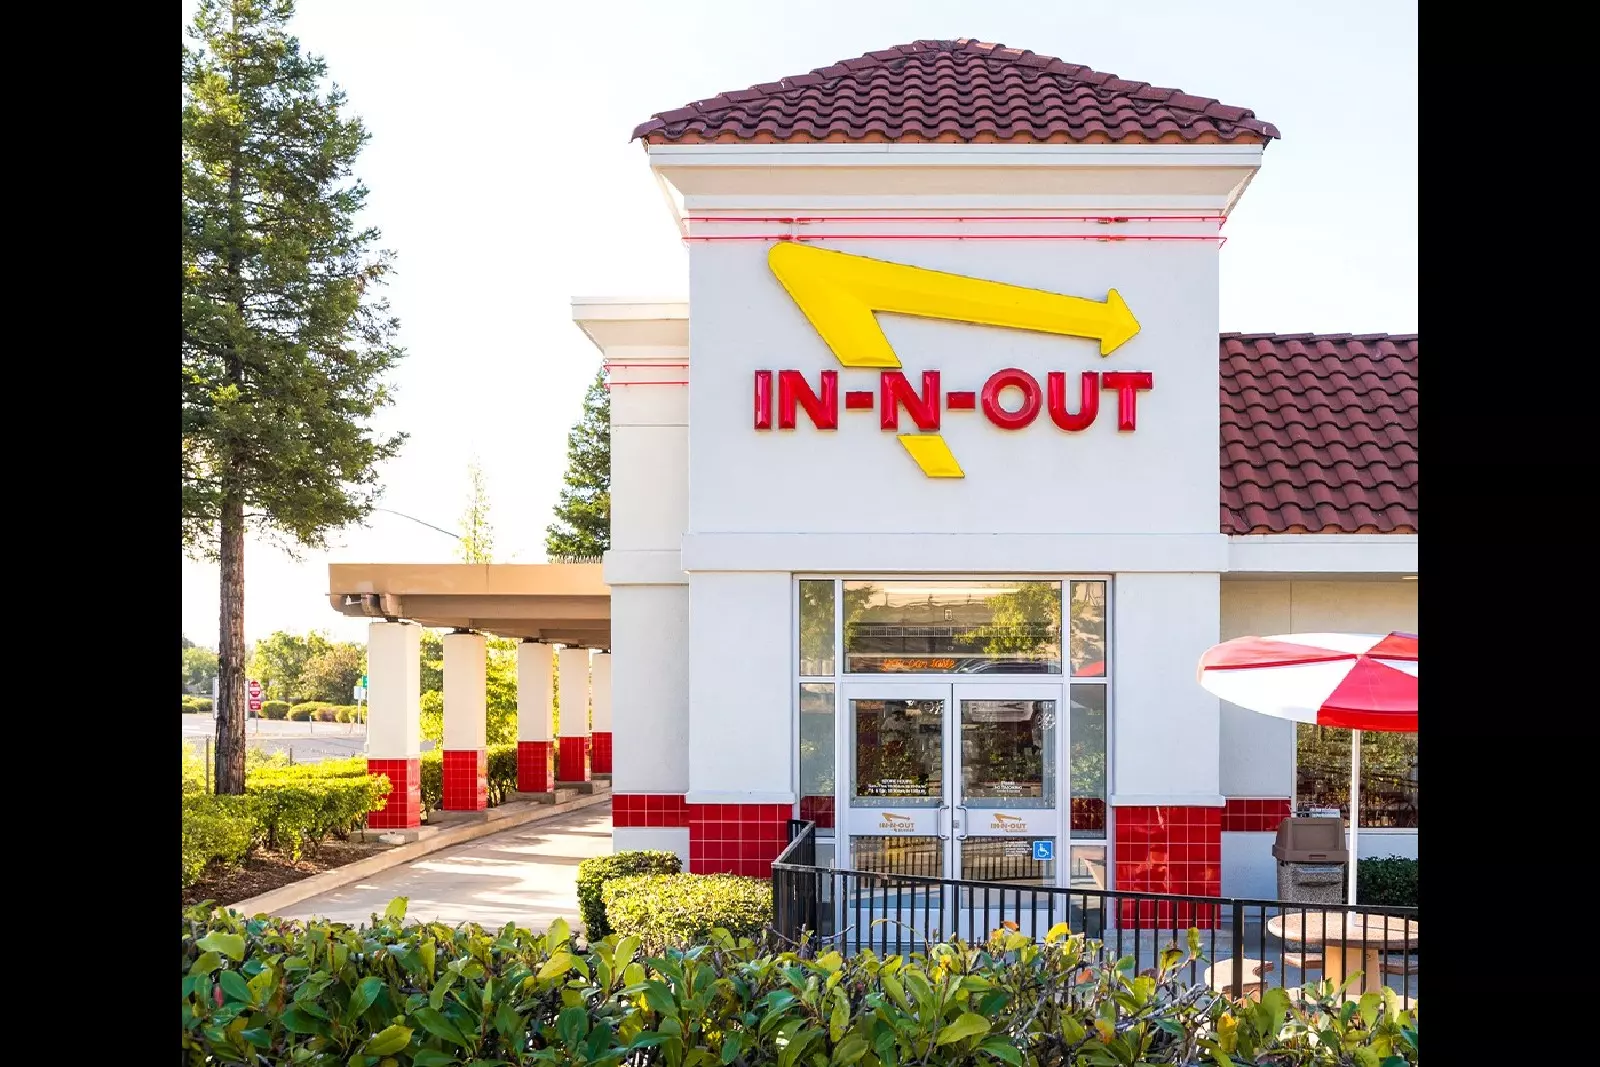 Is In-N-Out Burger coming to New Jersey?